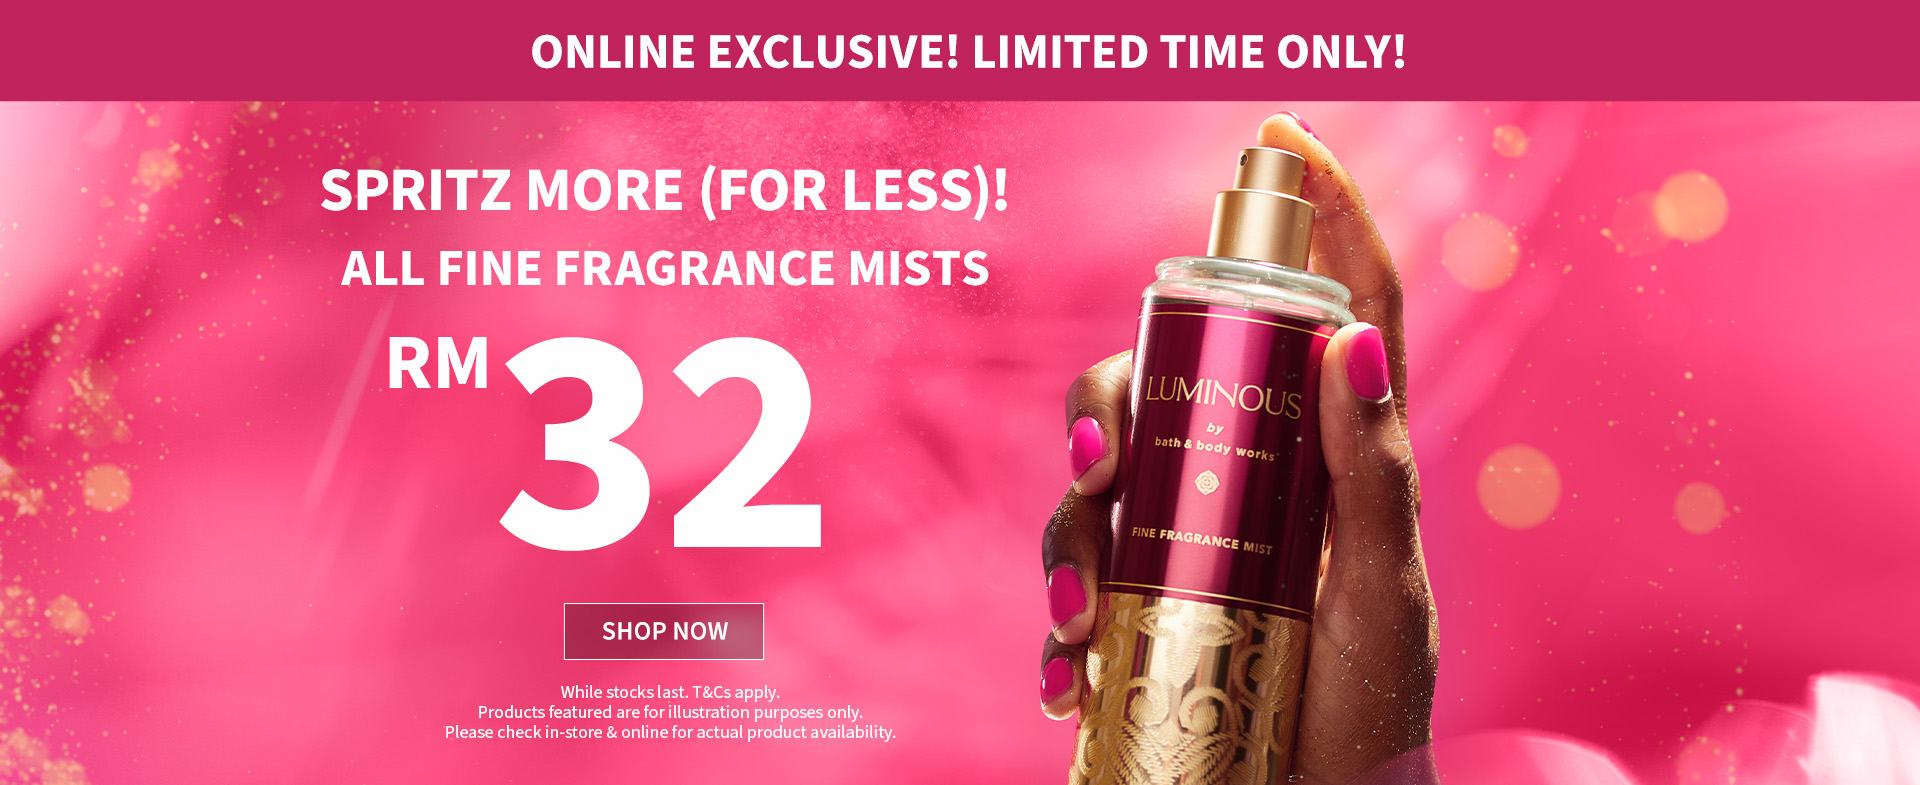 Online Exclusive Limited Time Only All Fine Fragrance Mists $$